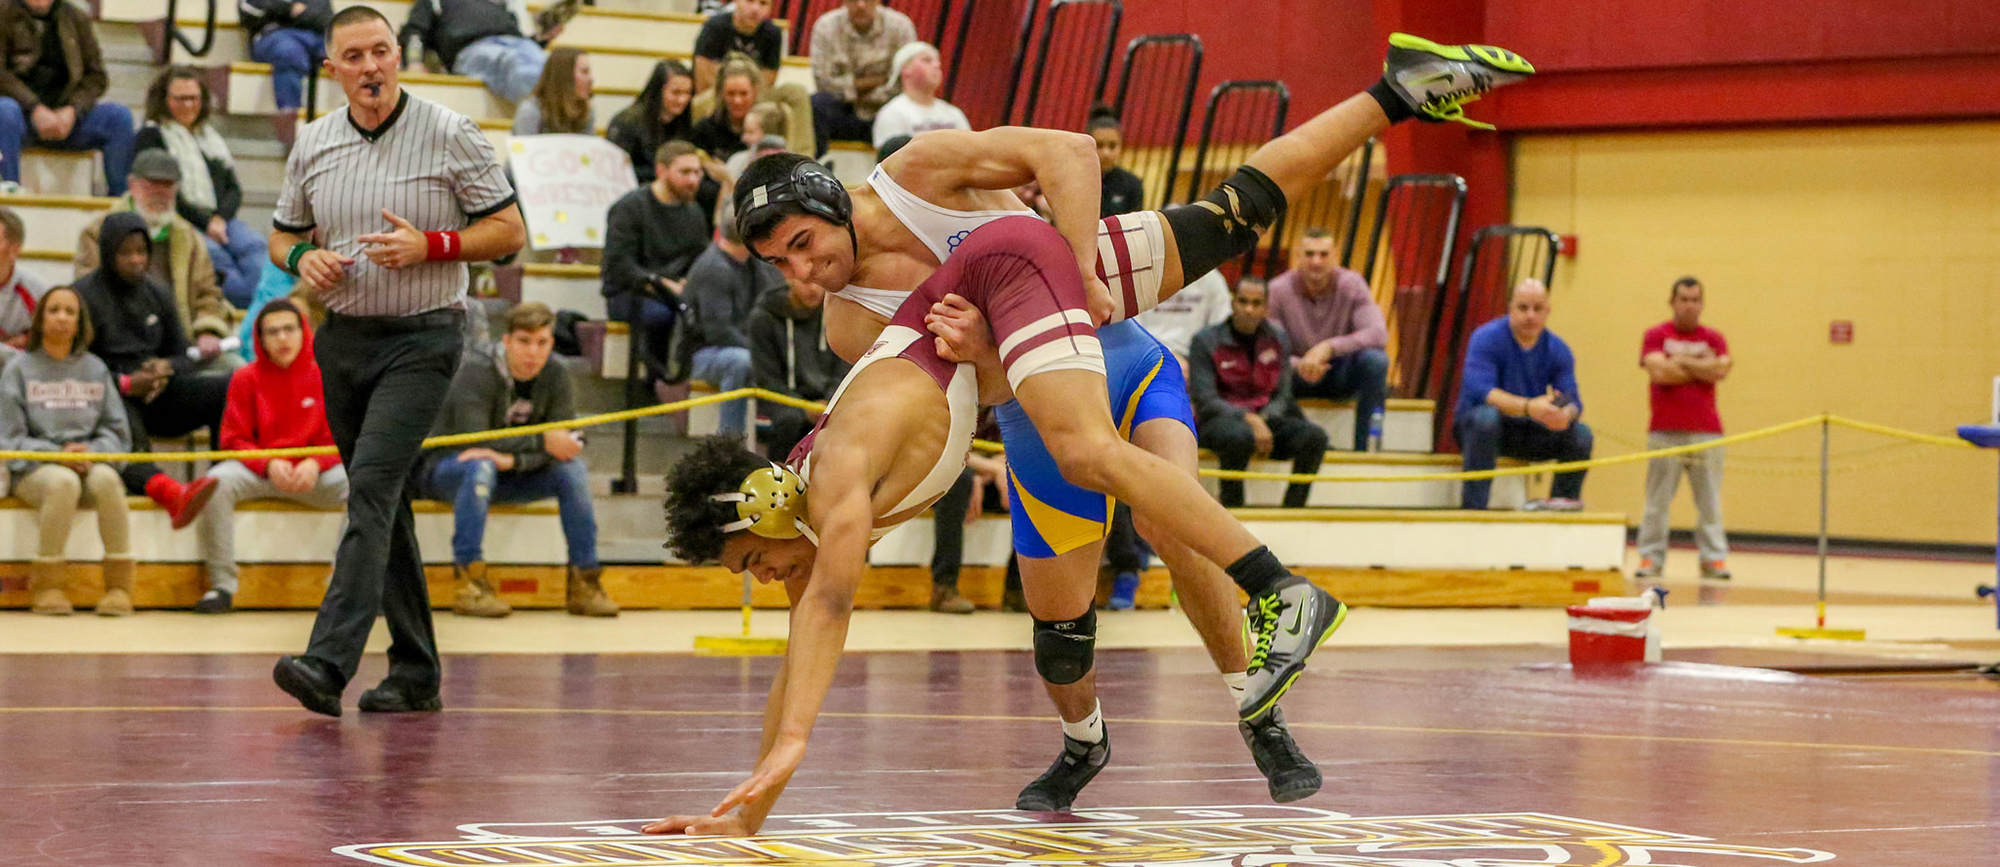 Sophomore Ryan Monteiro was named to the All-Tournament Team after going 3-0 at the NEWA Dual Meet Championship on Sunday. (Photo by Geoff Riccio)